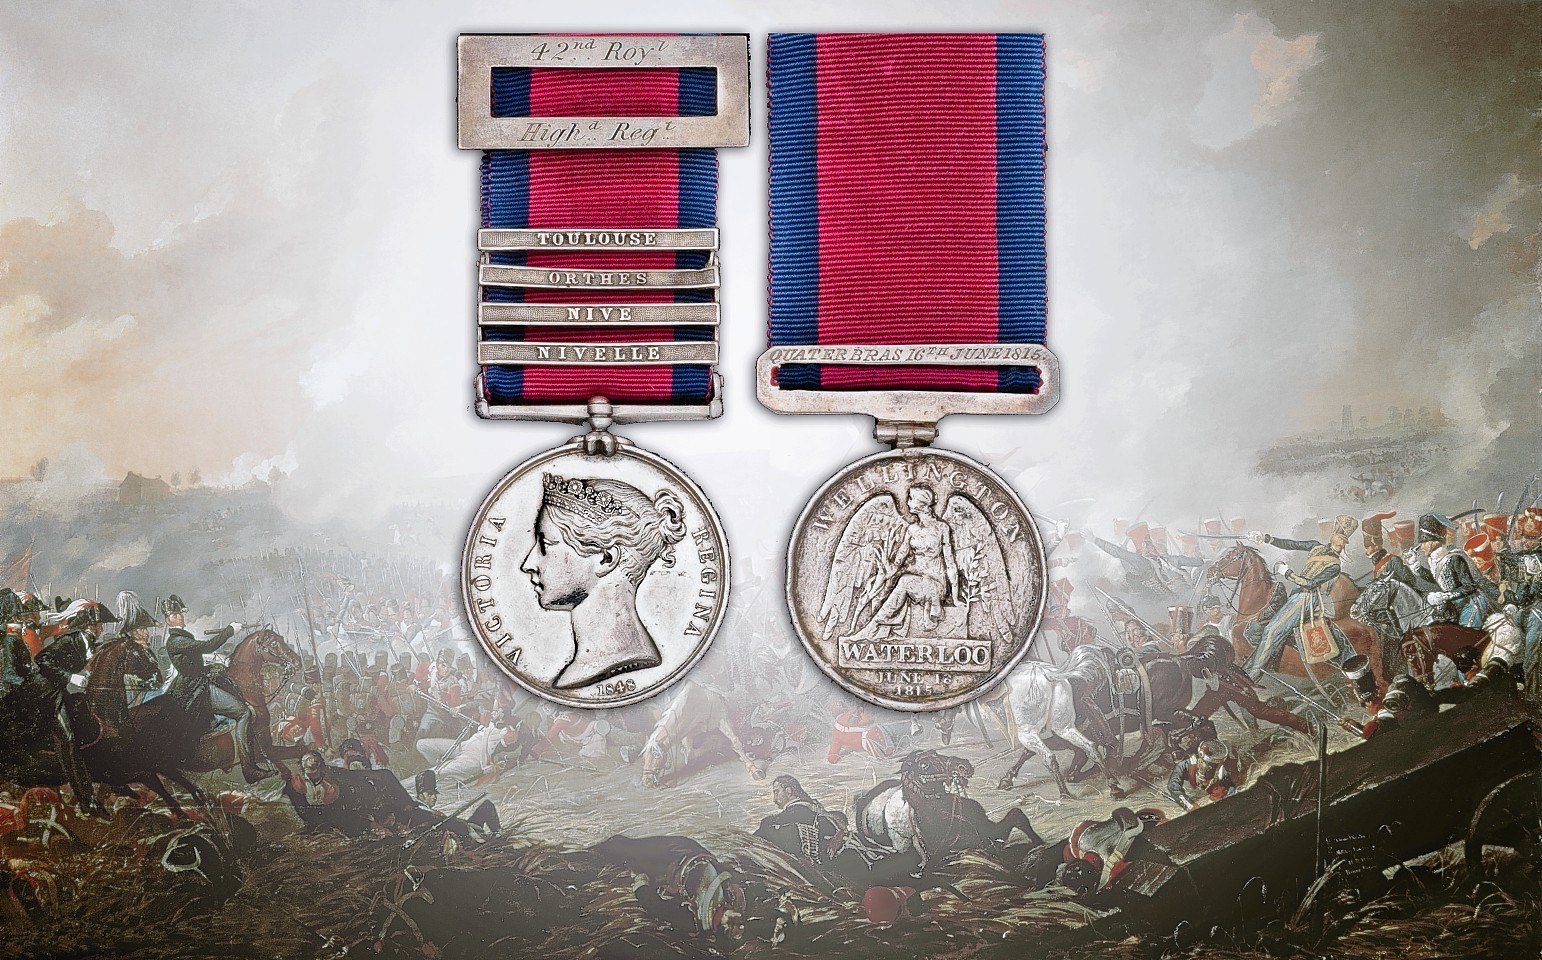 Wiliam Bowman's medals